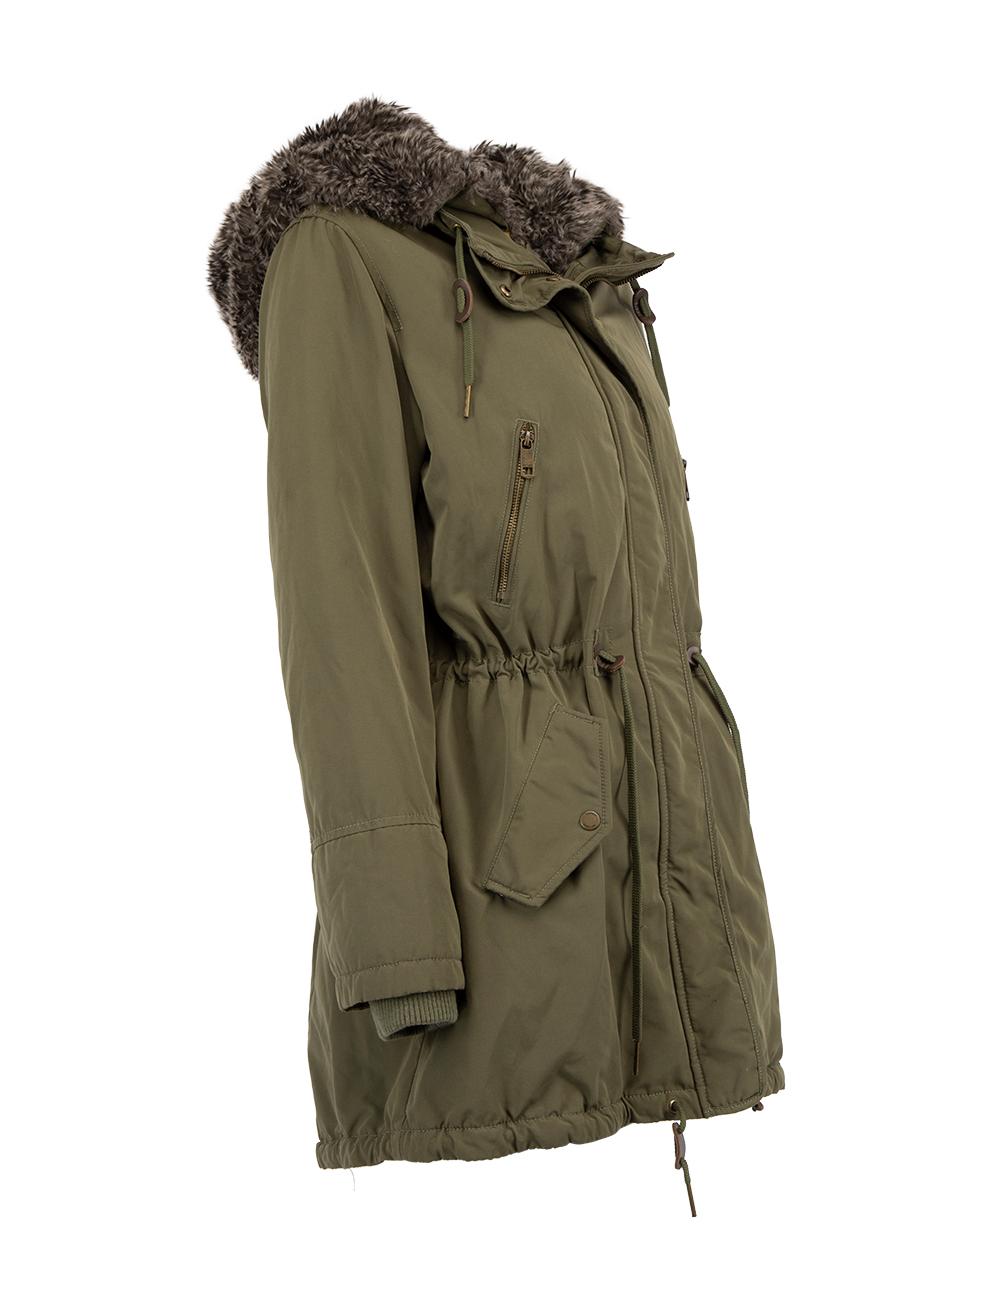 CONDITION is Very good. Minimal wear to parka is evident. Minimal wear to the fur insert and there is a ver small mark at the bottom of the parka on this used Tommy Hilfiger designer resale item. Details Khaki Polyester Parka coat Mid length Padded